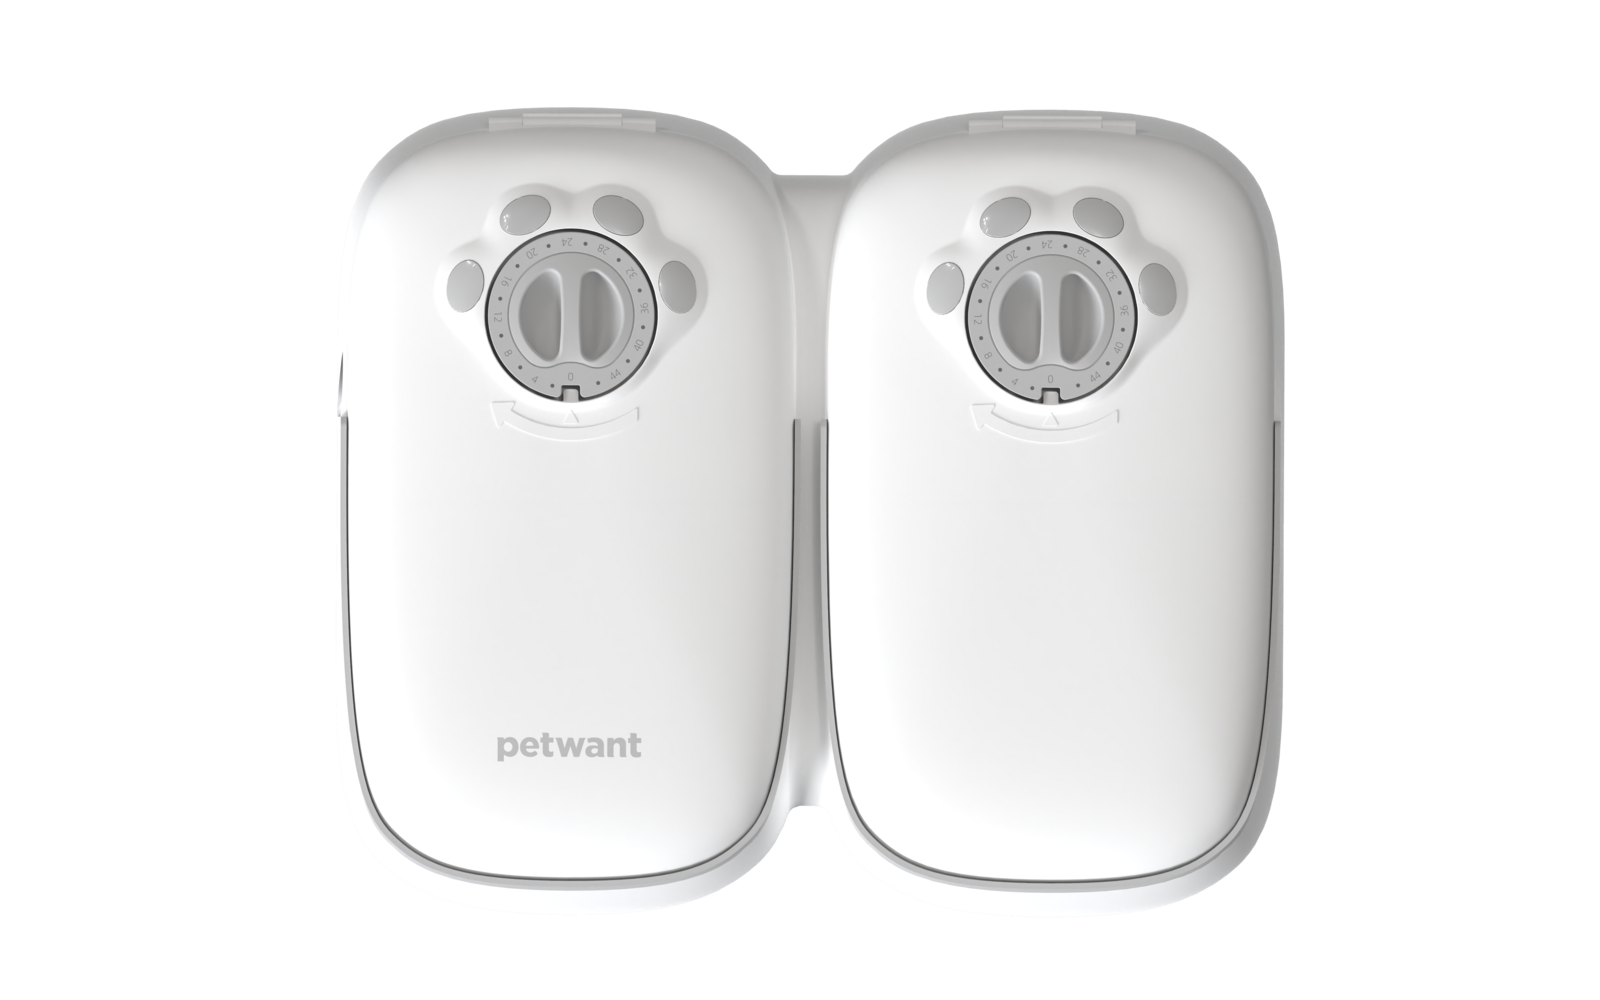 2 Meal Automatic Pet Food Feeder Timer for Dogs, Puppies & Cats